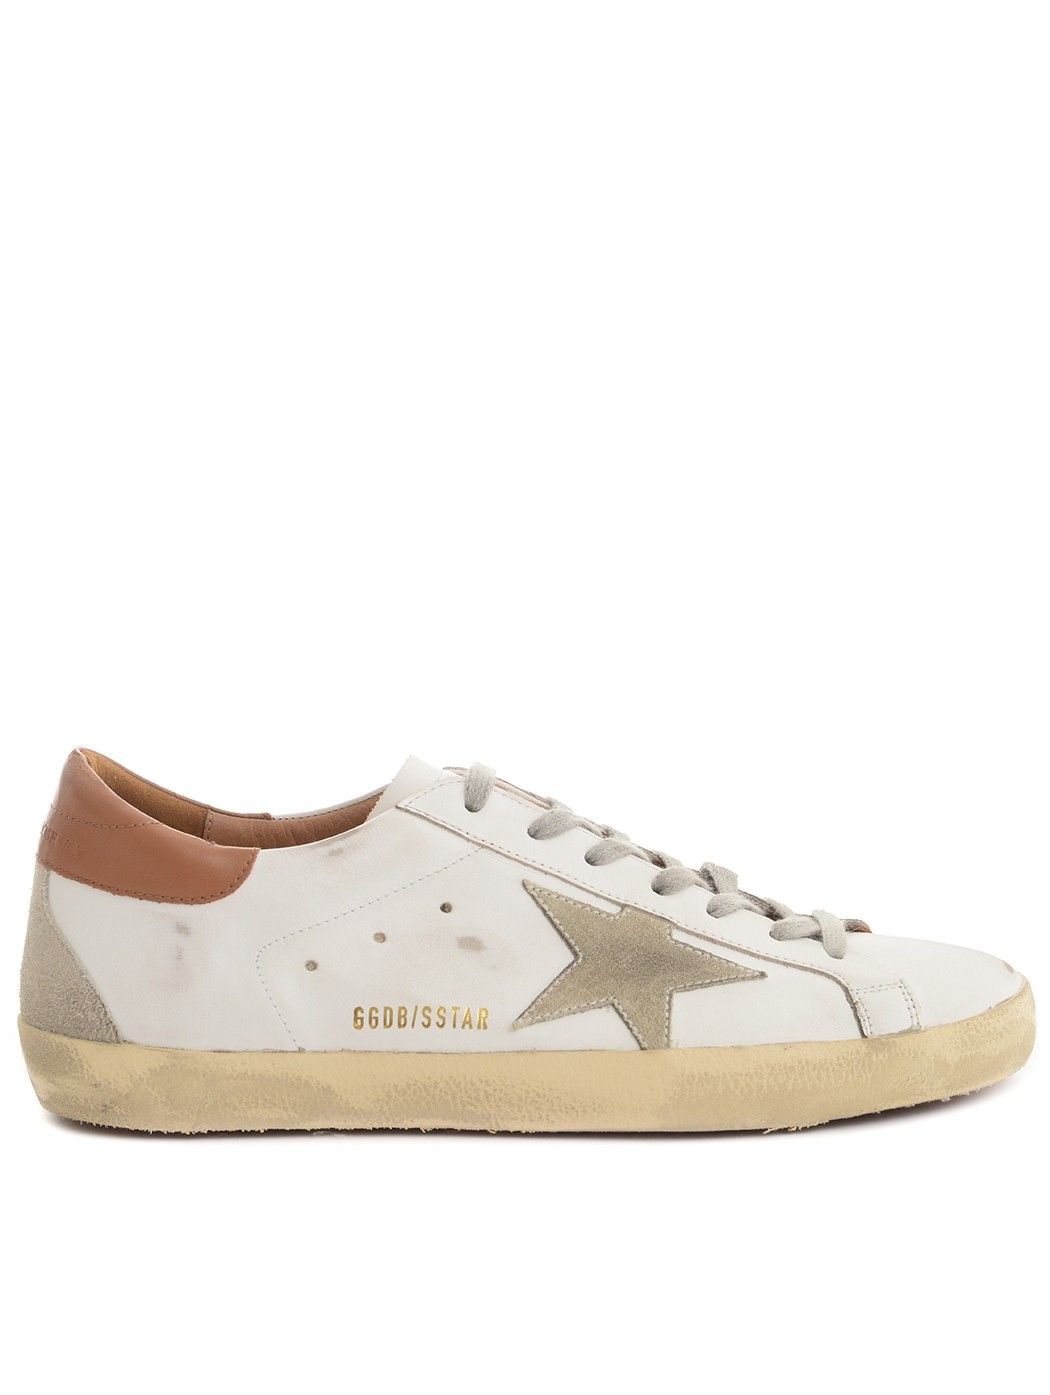  MAN SHOES,SPRING SUMMER SHOES,CHURCH'S SHOES,DIADORA HERITAGE SHOES,DIADORA HERITAGE SNEAKERS,GOLDEN GOOSE SHOES,GOLDEN GOOSE SNEAKERS  GOLDEN GOOSE GMF00102